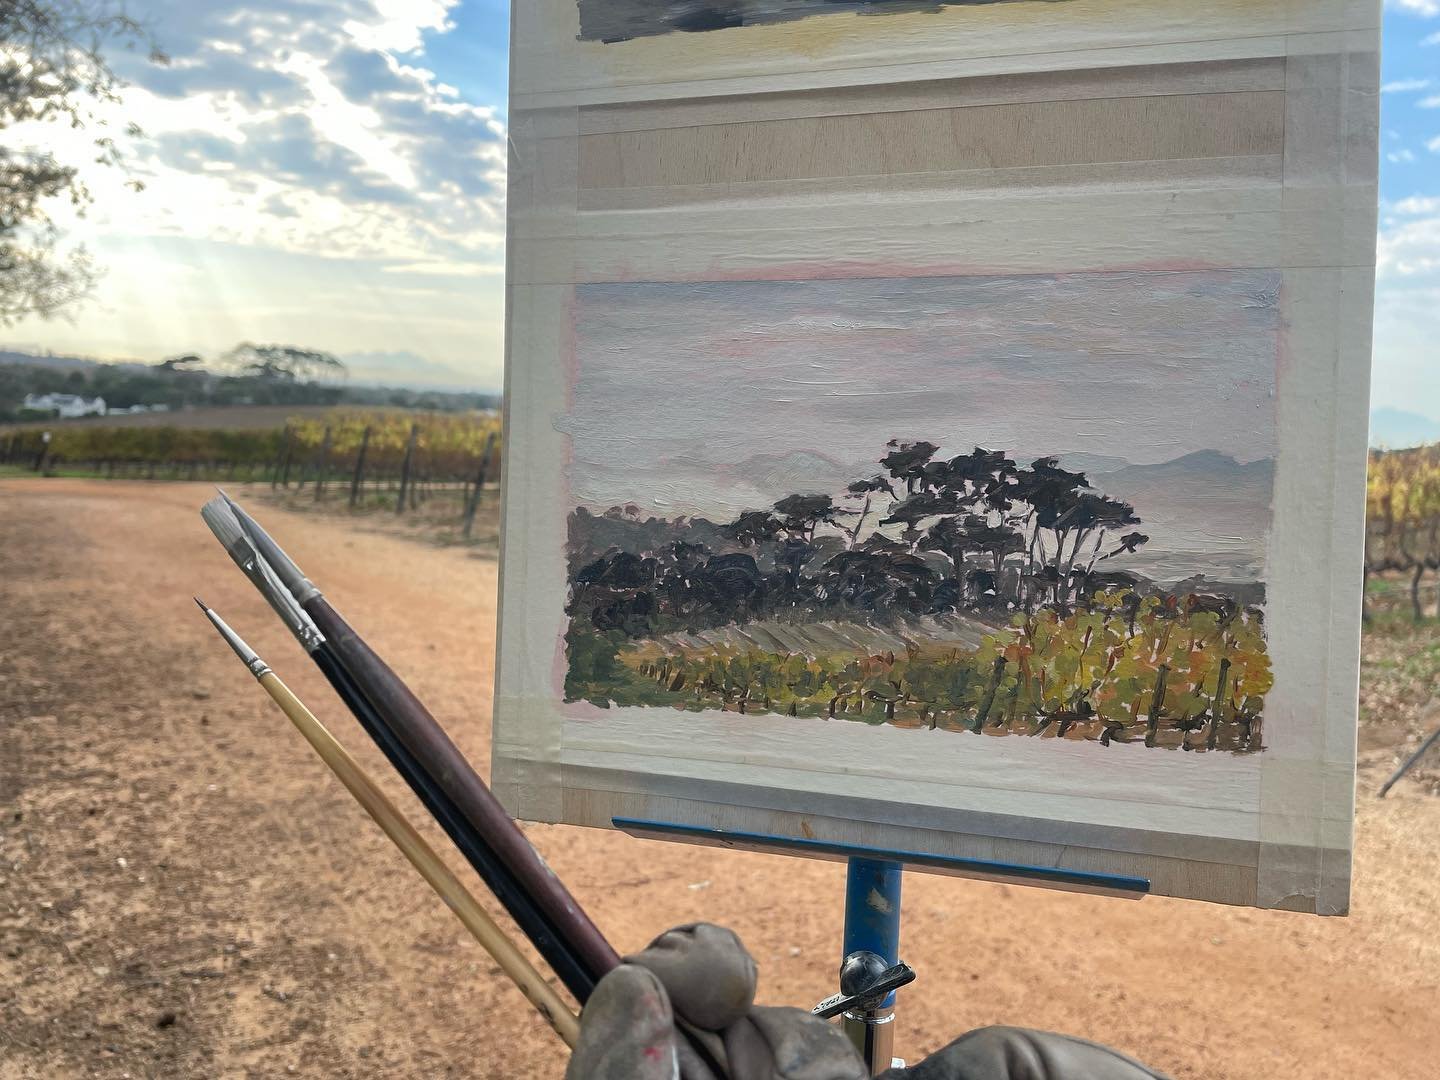 A three-brush kind of morning&hellip; I didn&rsquo;t realise I&rsquo;d used so few brushes until I wrapped up for the day! A magical still morning in Groot Constantia. The pinks in the sky in Autumn are like a warm hug (helped by the warm Berg wind a